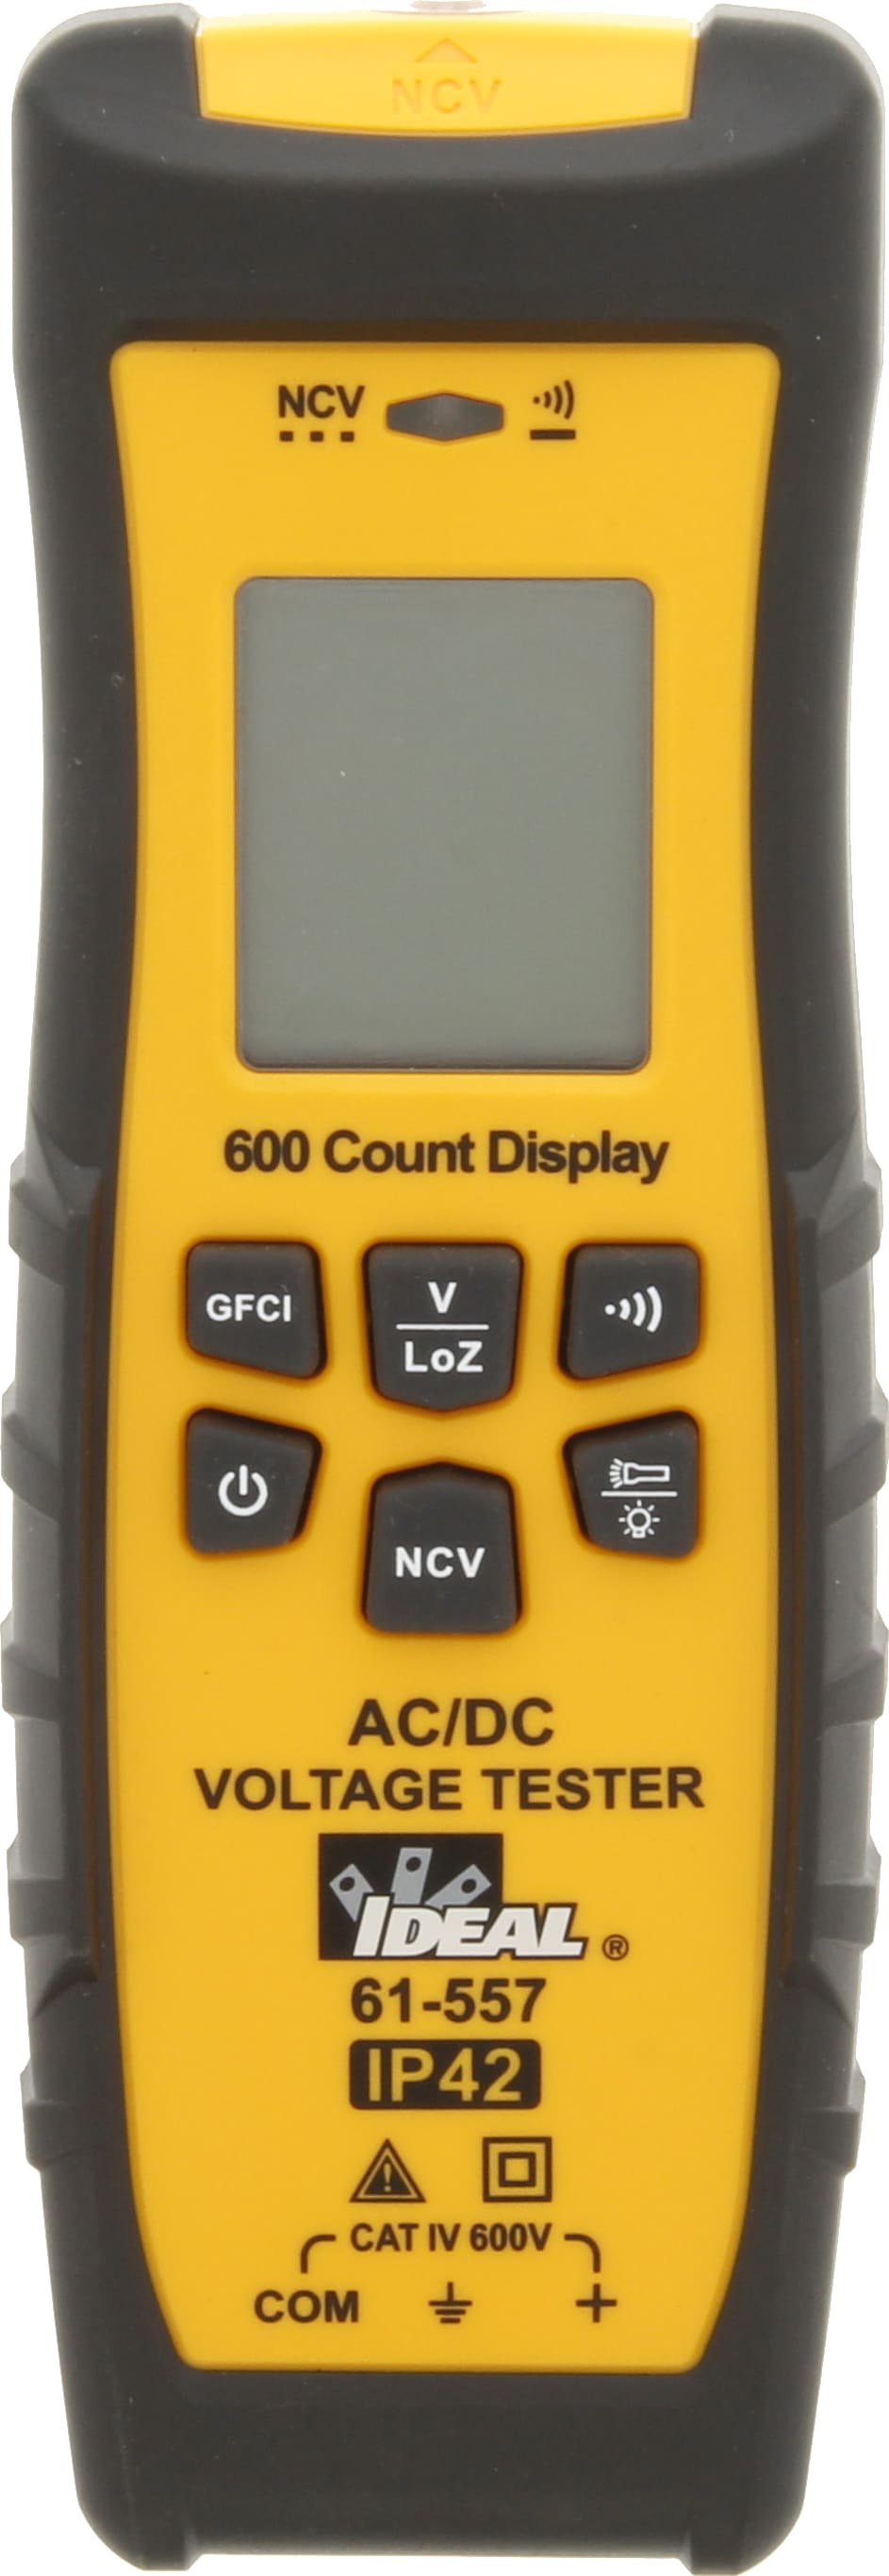 Ideal 61-557 - Voltage and Continuity Tester